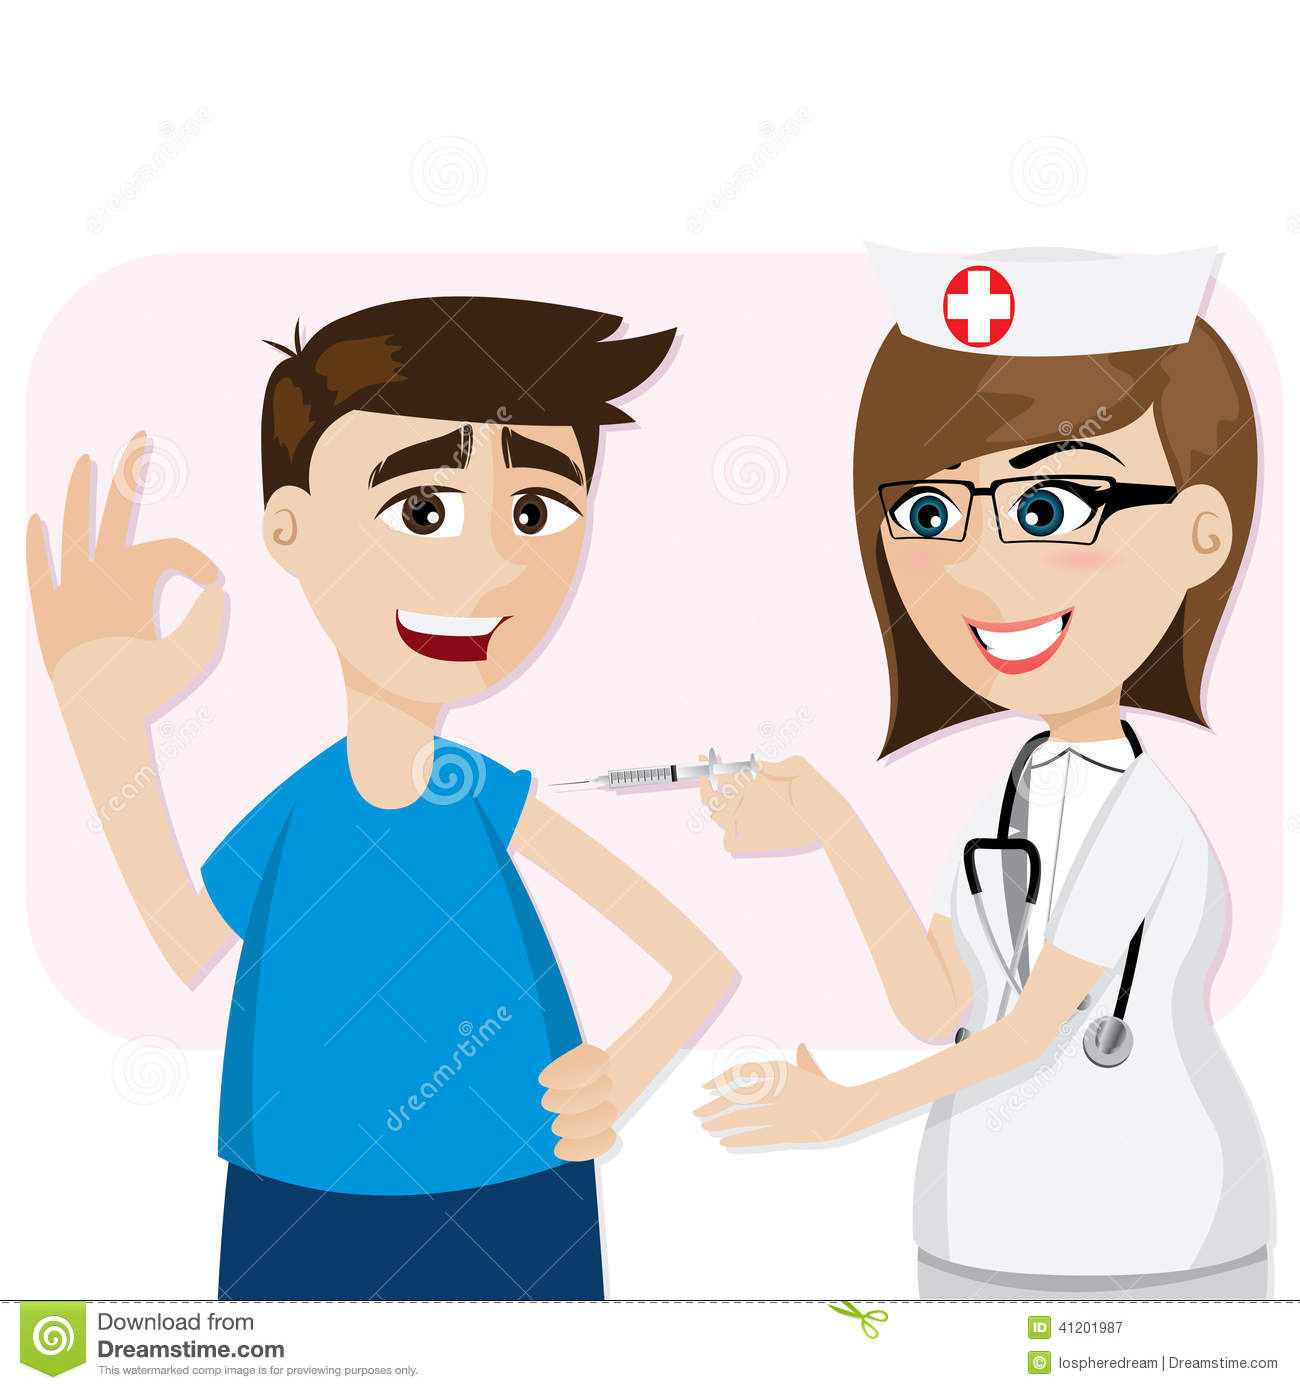 Illustration Of Cartoon Doctor Vaccination For Patient In Healthcare